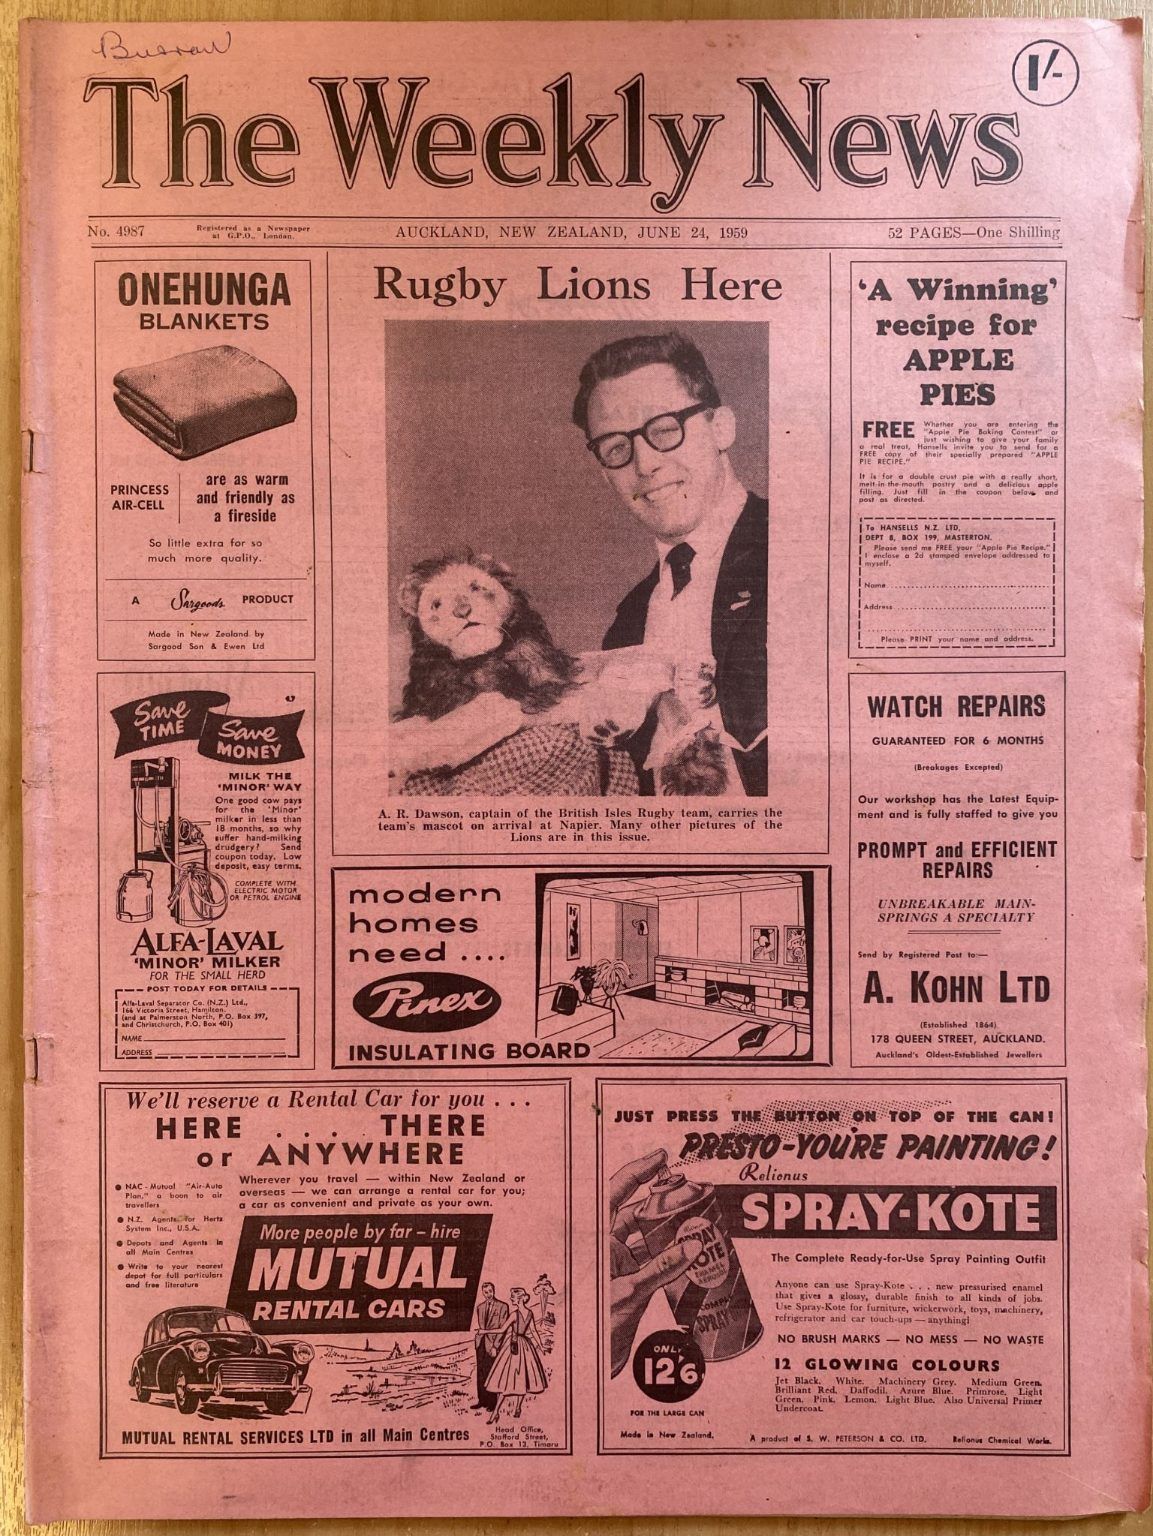 OLD NEWSPAPER: The Weekly News - No. 4987, 24 June 1959